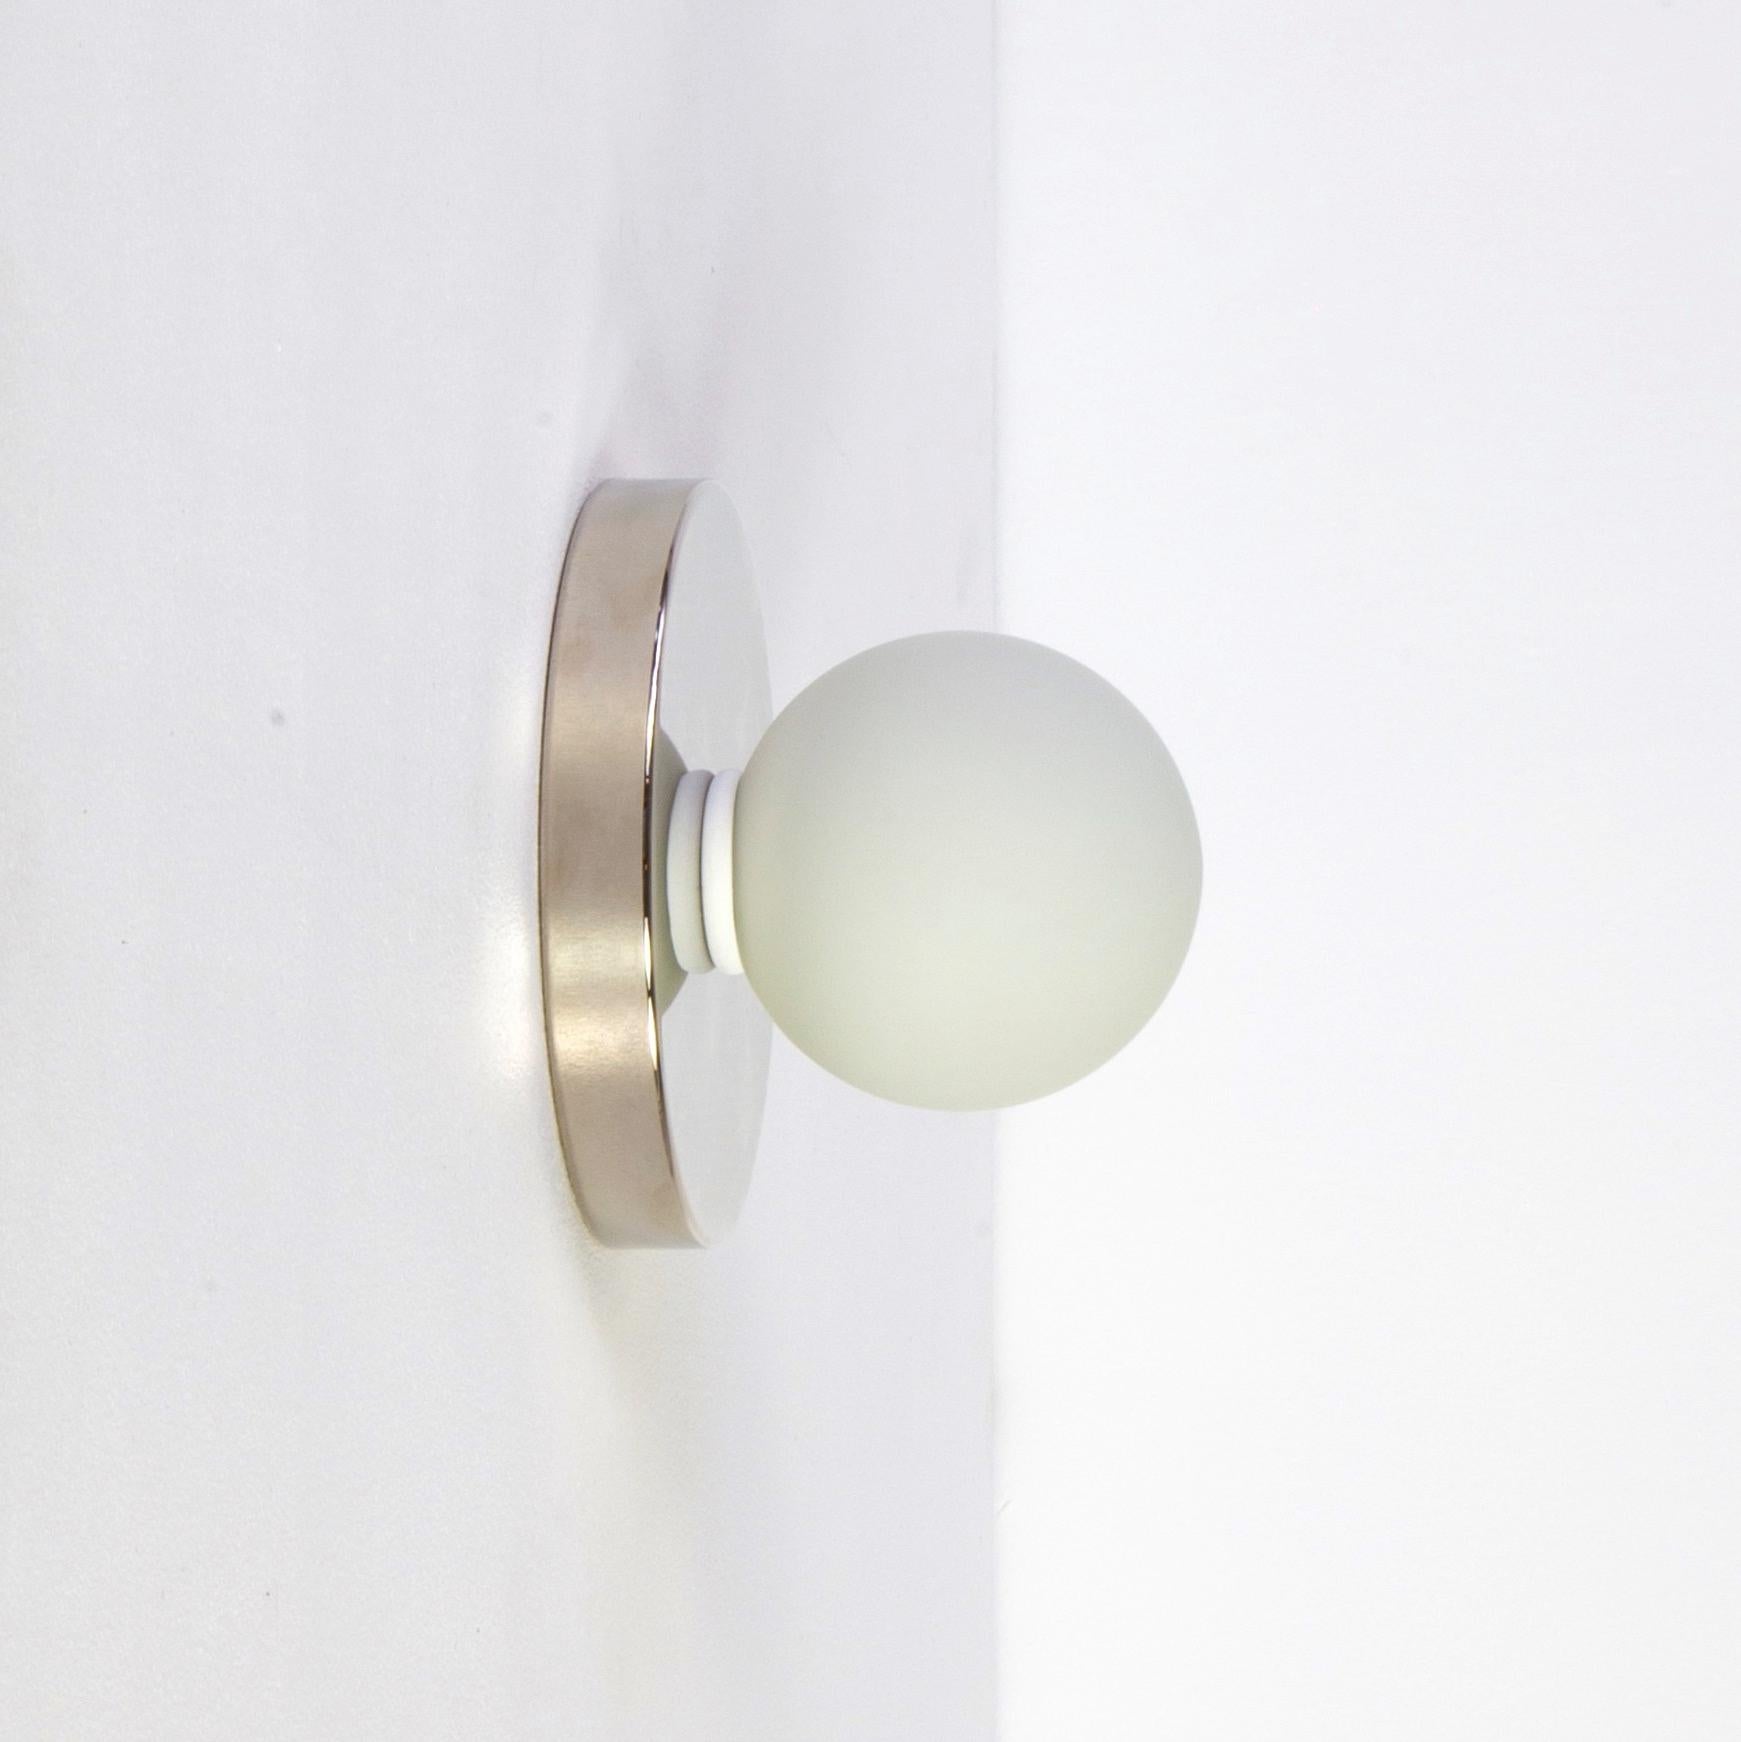 Contemporary Globe Sconce by Research.Lighting, Polished Nickel, Made to Order For Sale